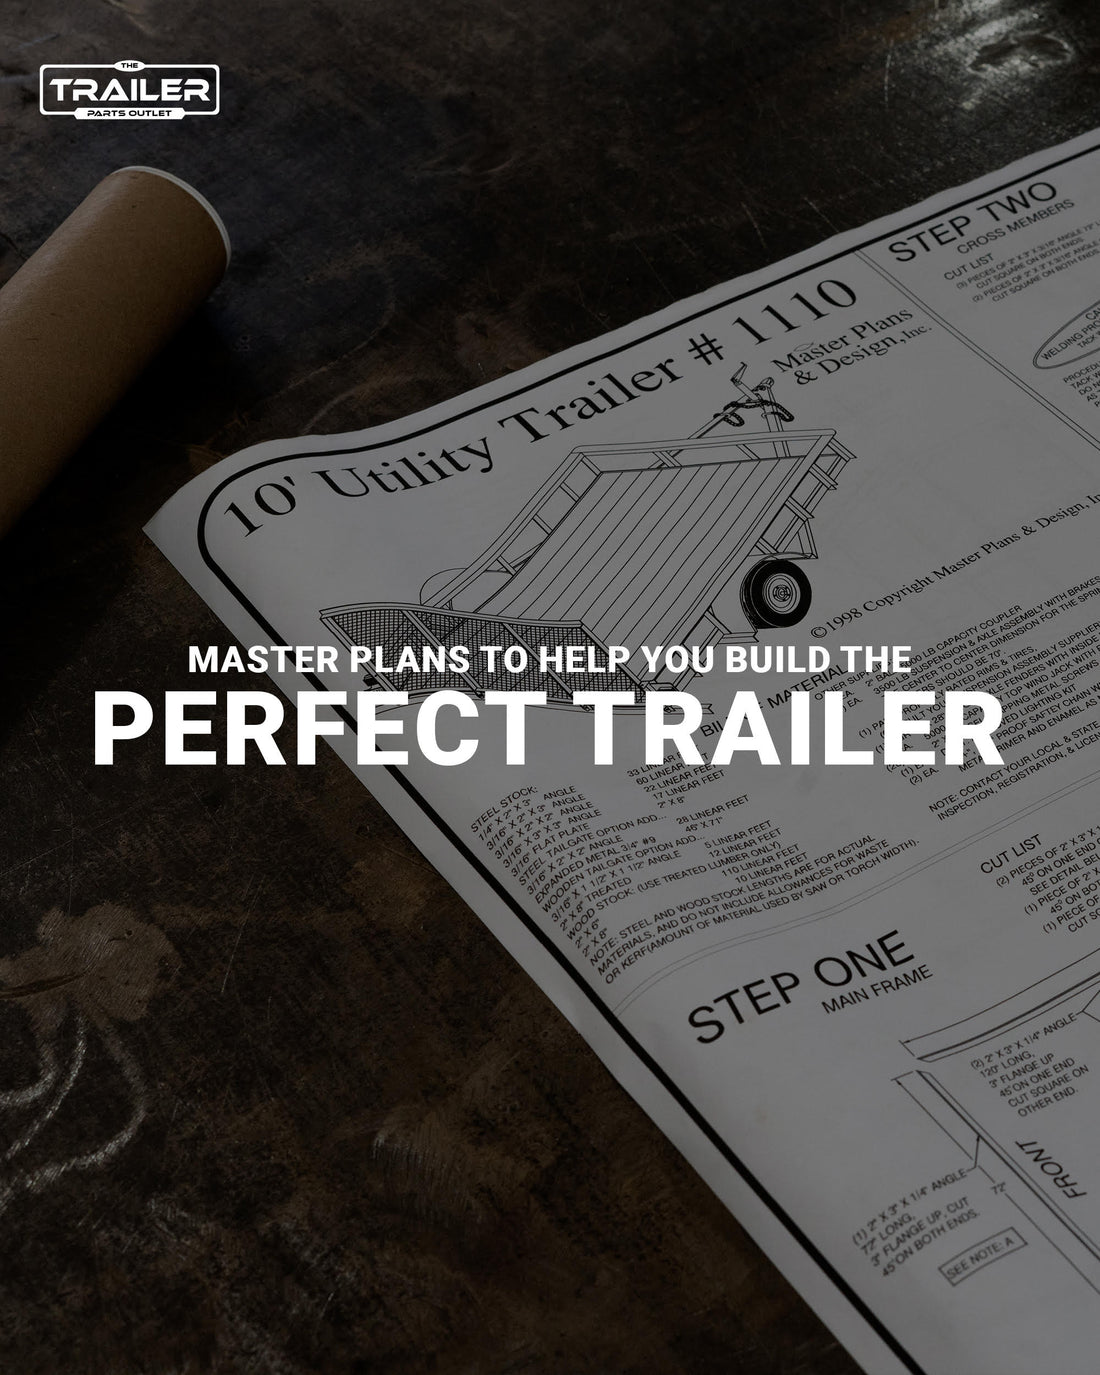 Master Plans to Help You Build the Perfect Trailer